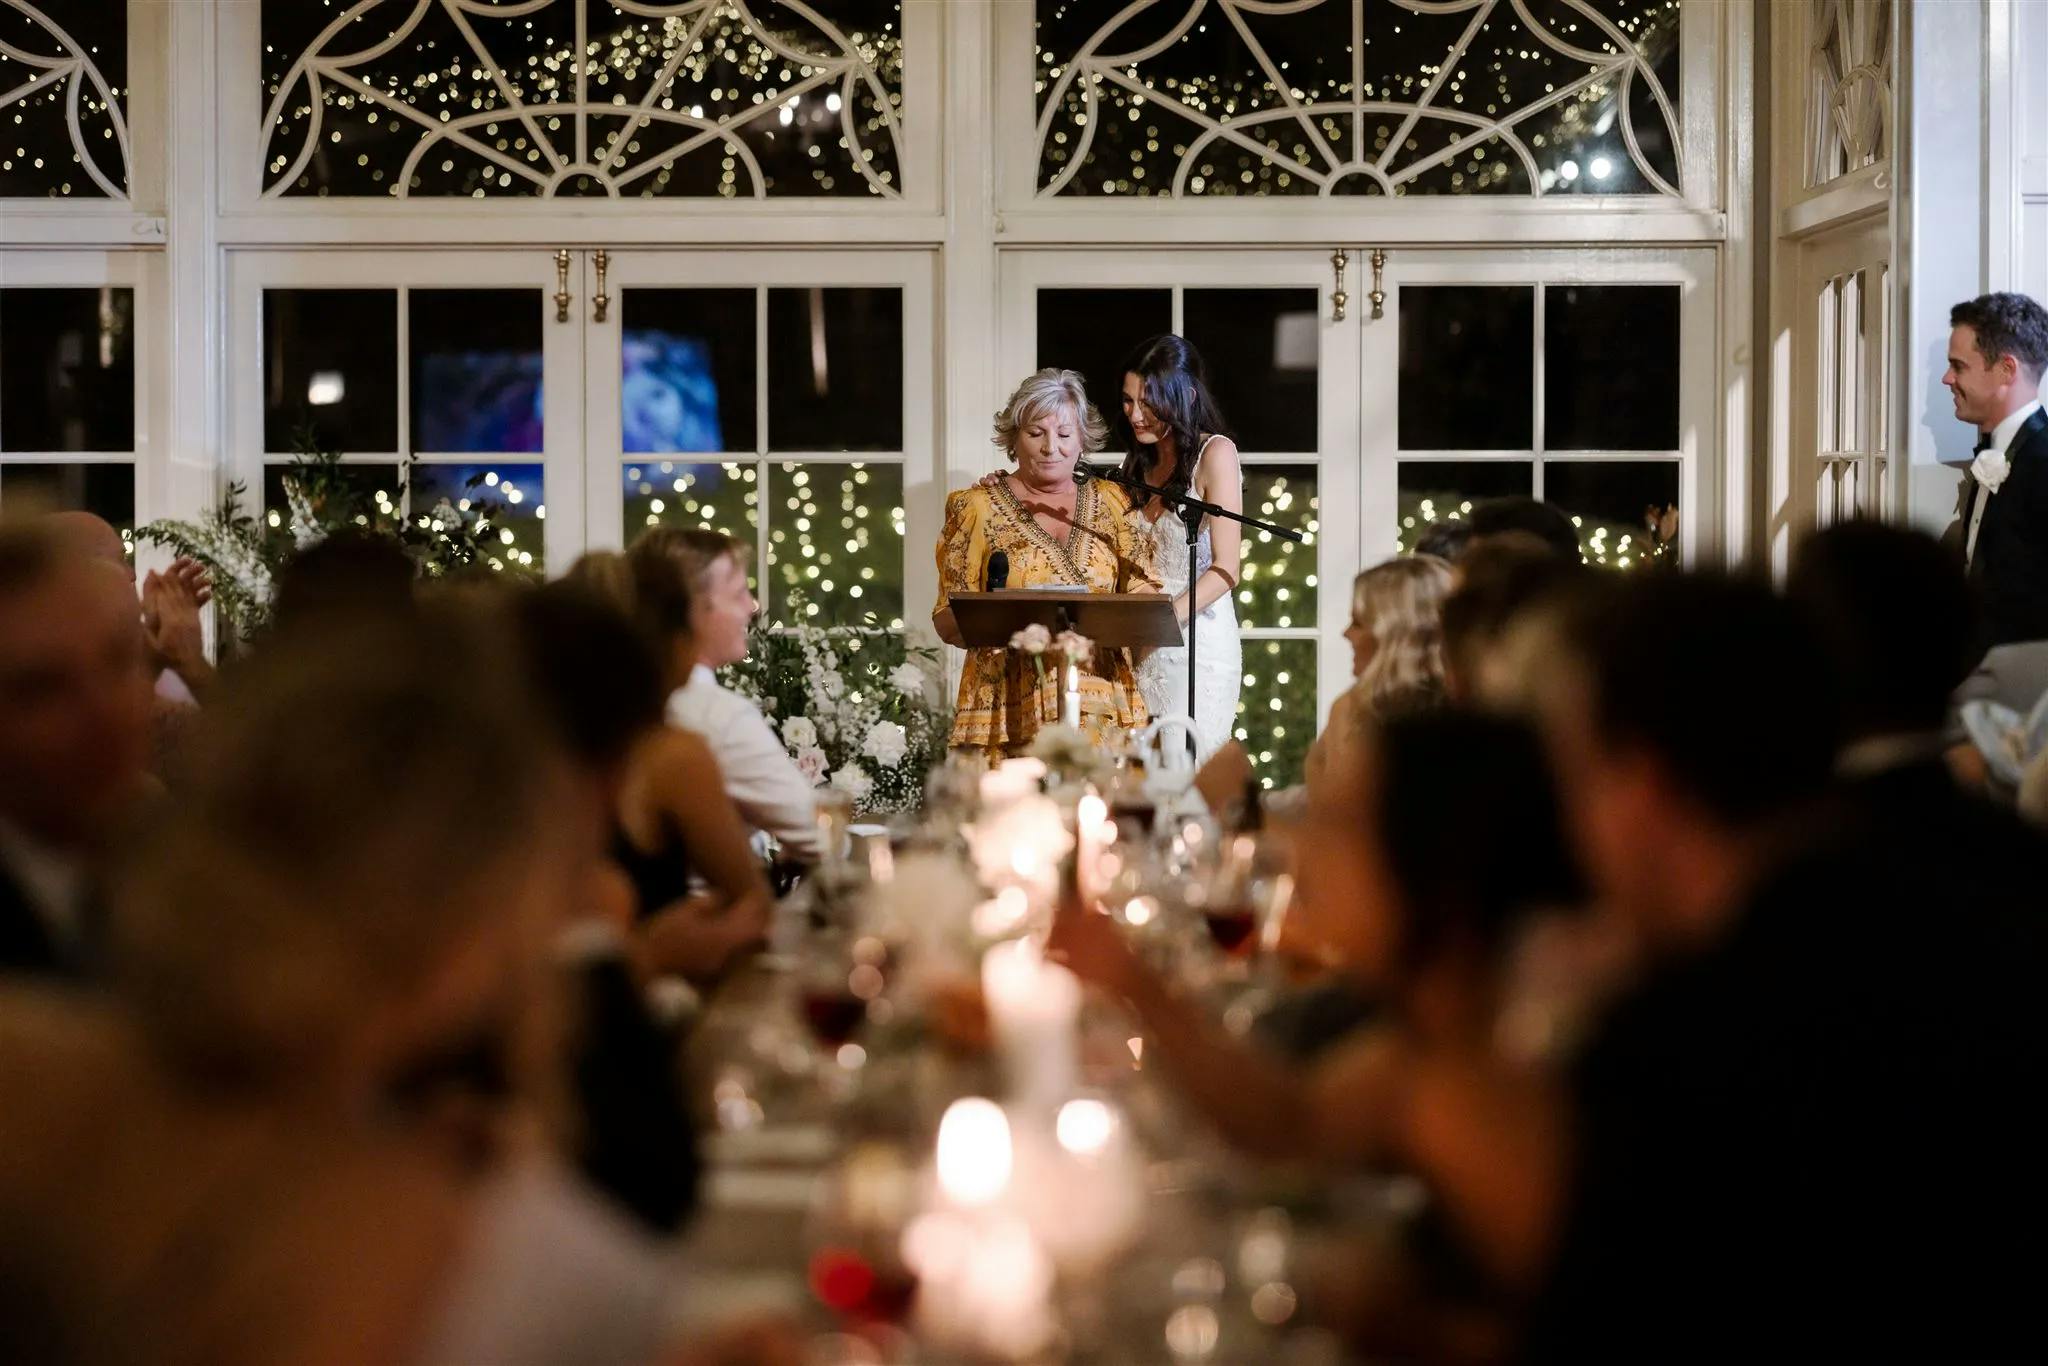 A woman in a gold and black dress stands at a podium delivering a speech, while a second woman in a white dress stands beside her. Guests are seated at dimly lit tables in a decorated venue with fairy lights and arched windows in the background.